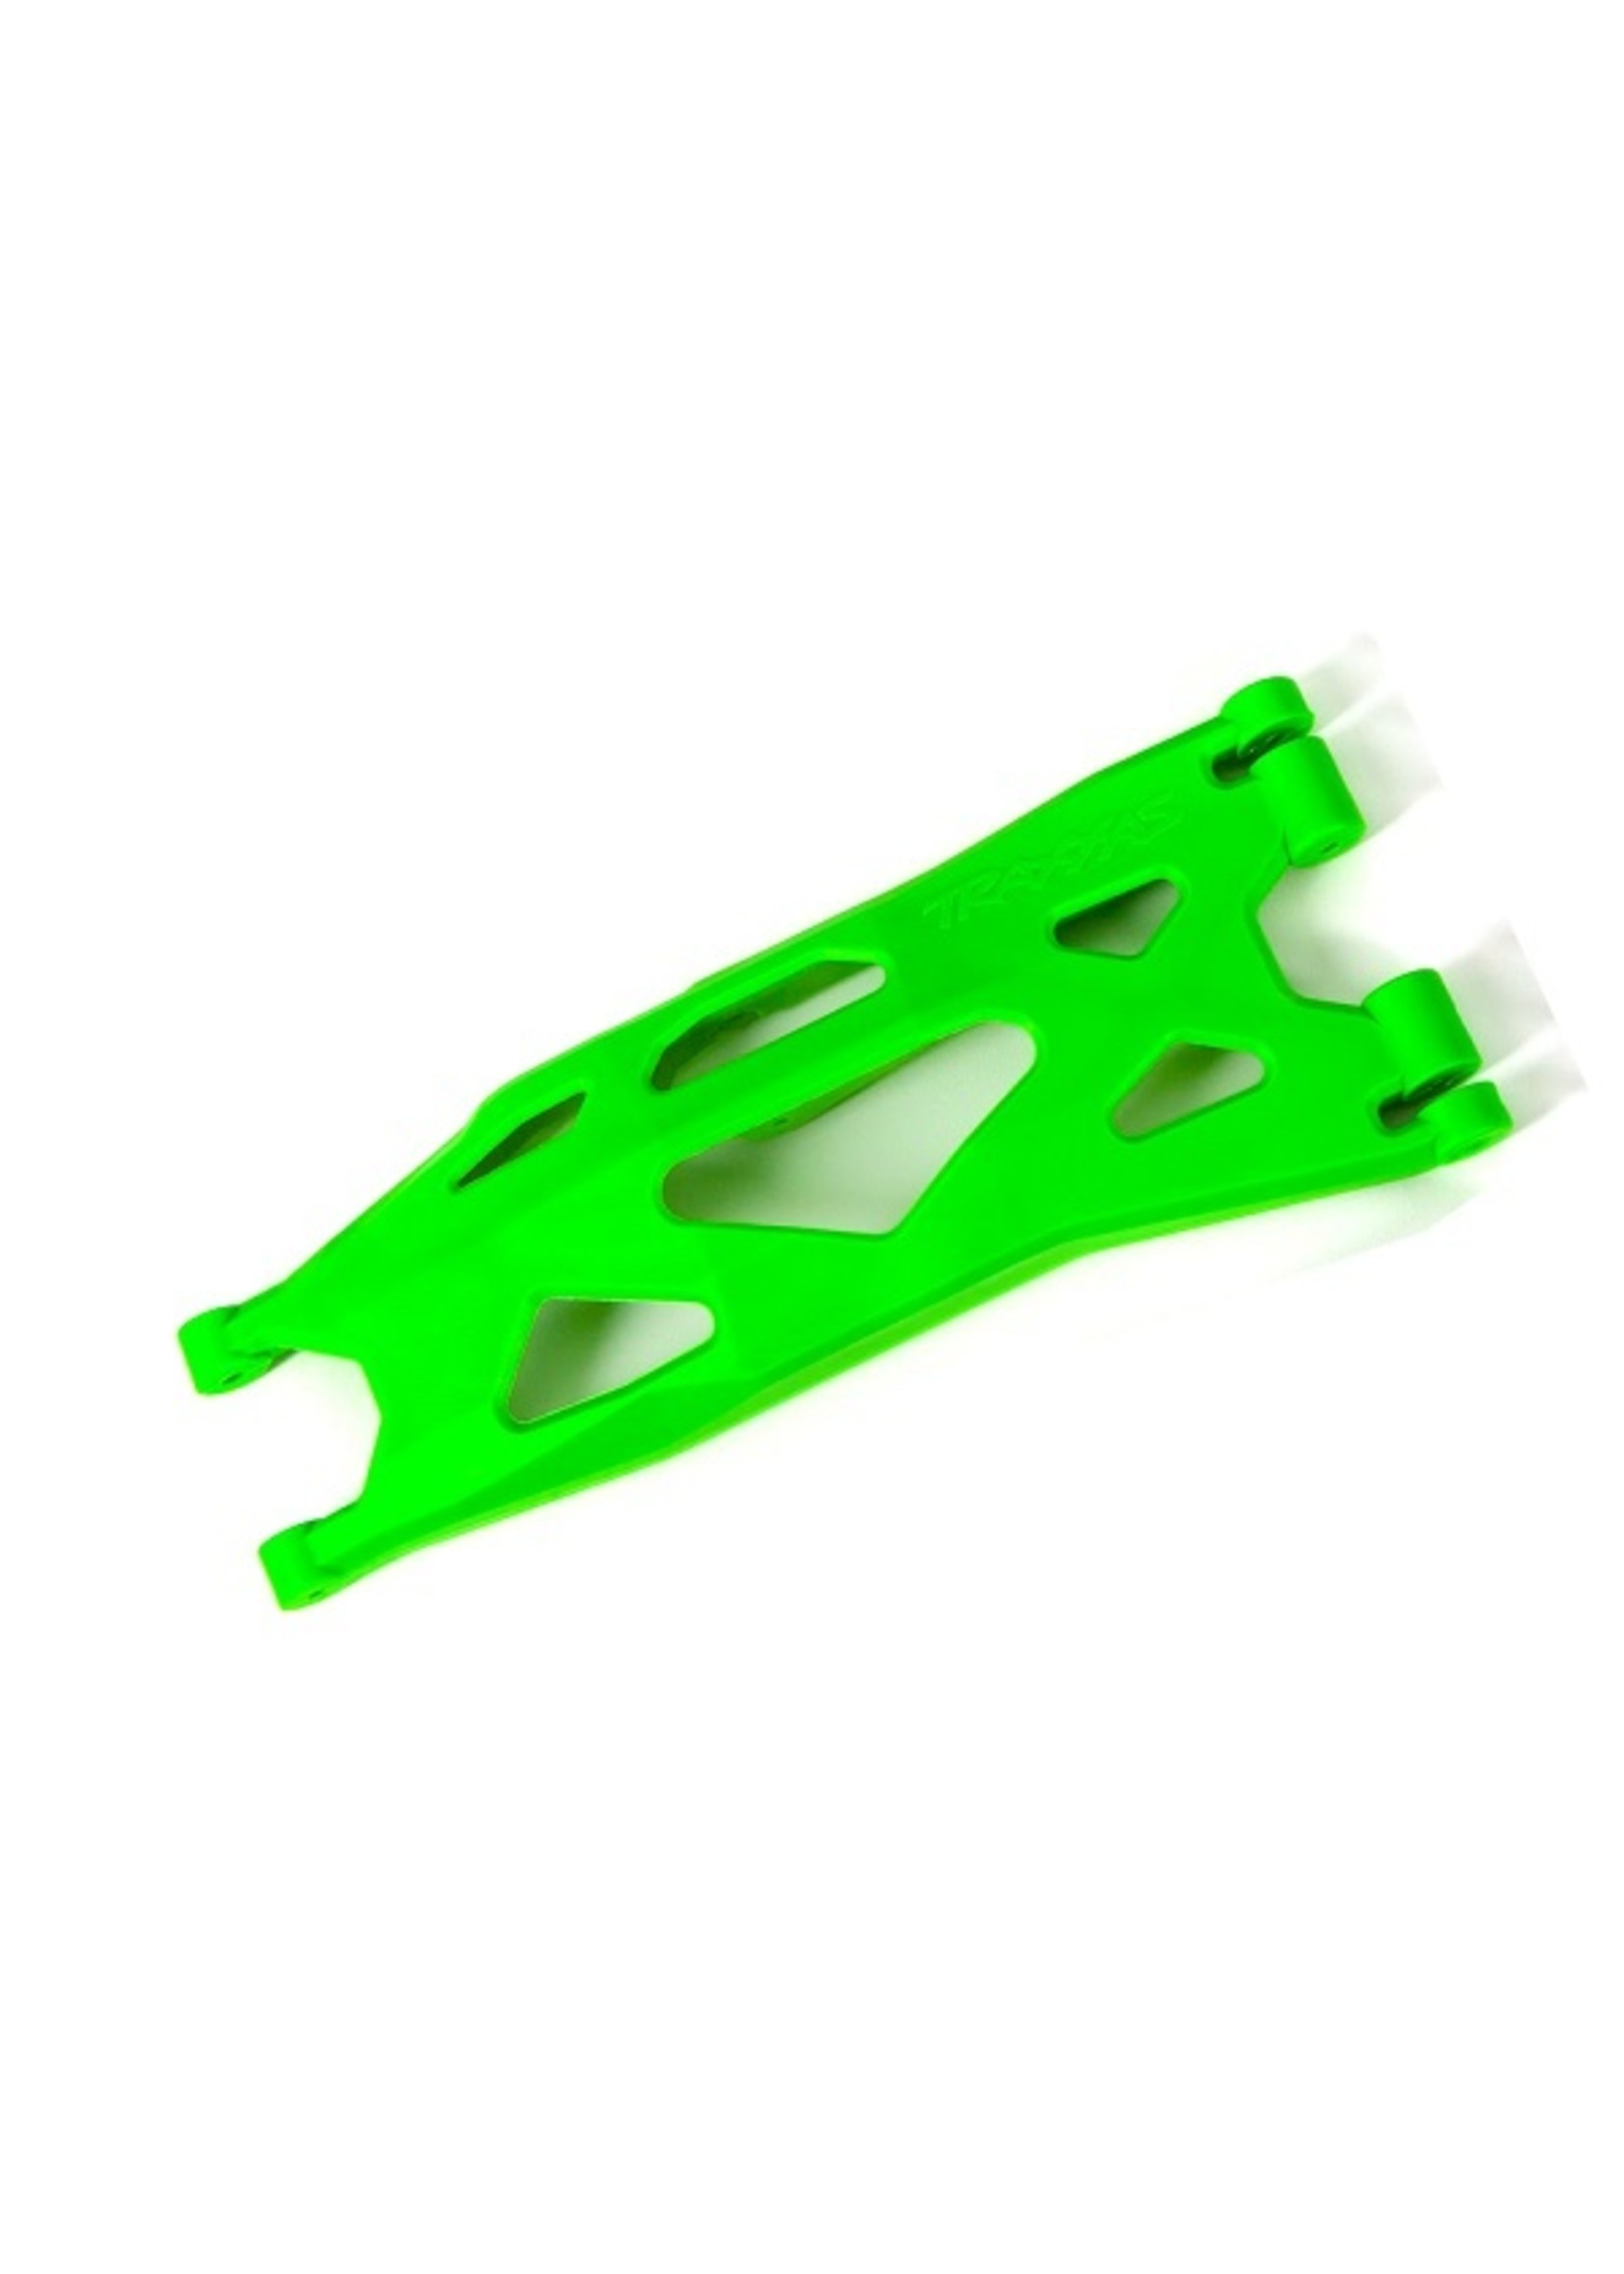 Traxxas 7893G - Suspension Arm, Lower RT - Green